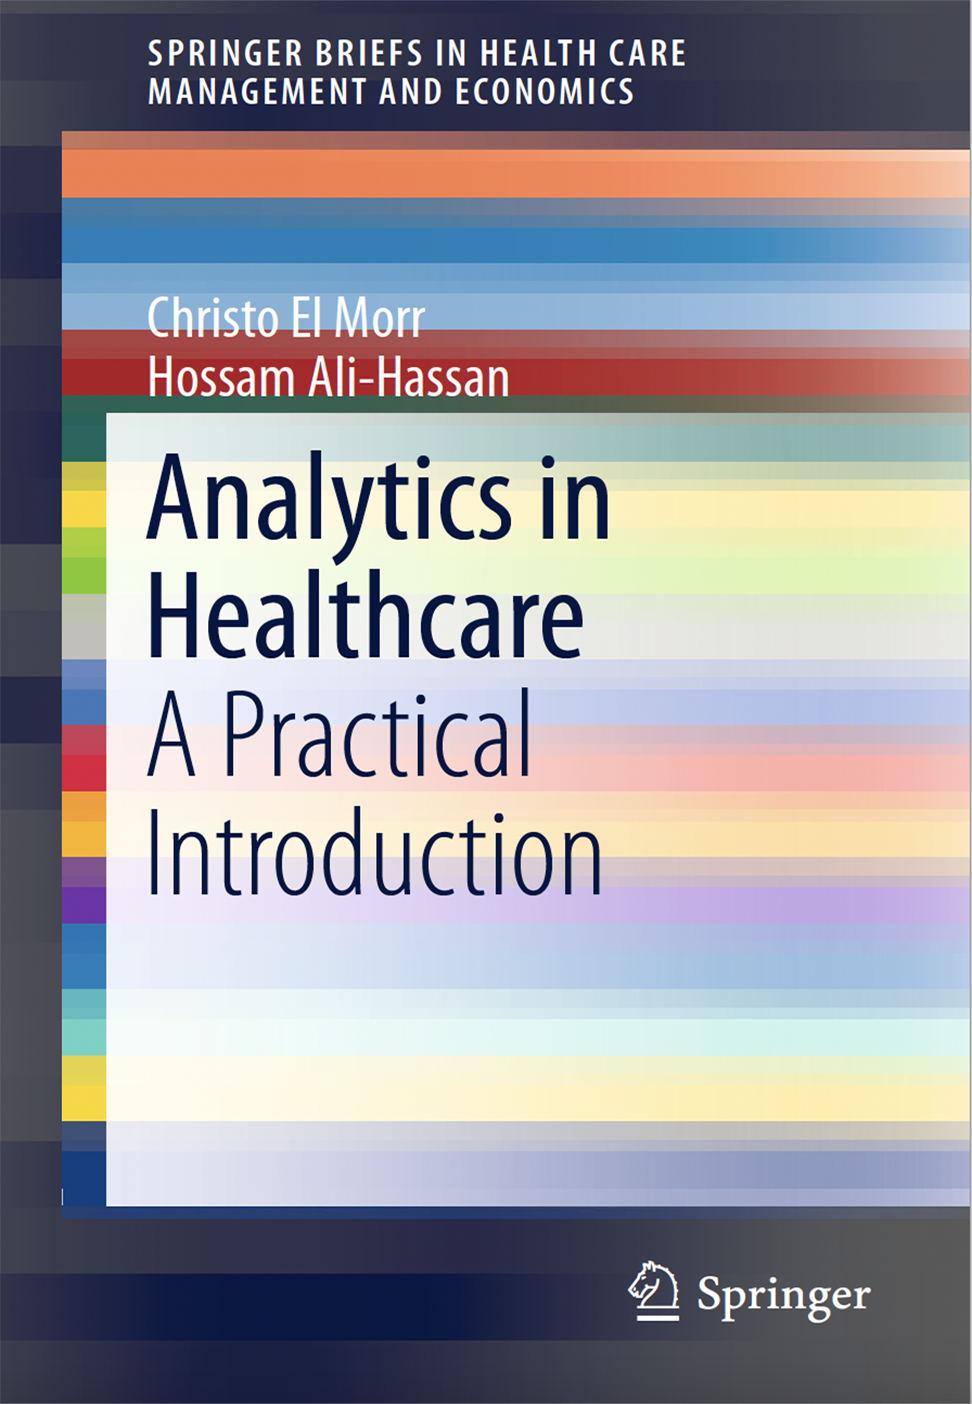 Cover for the Analytics in Healthcare Book. It shows straights colored horizontal lines.